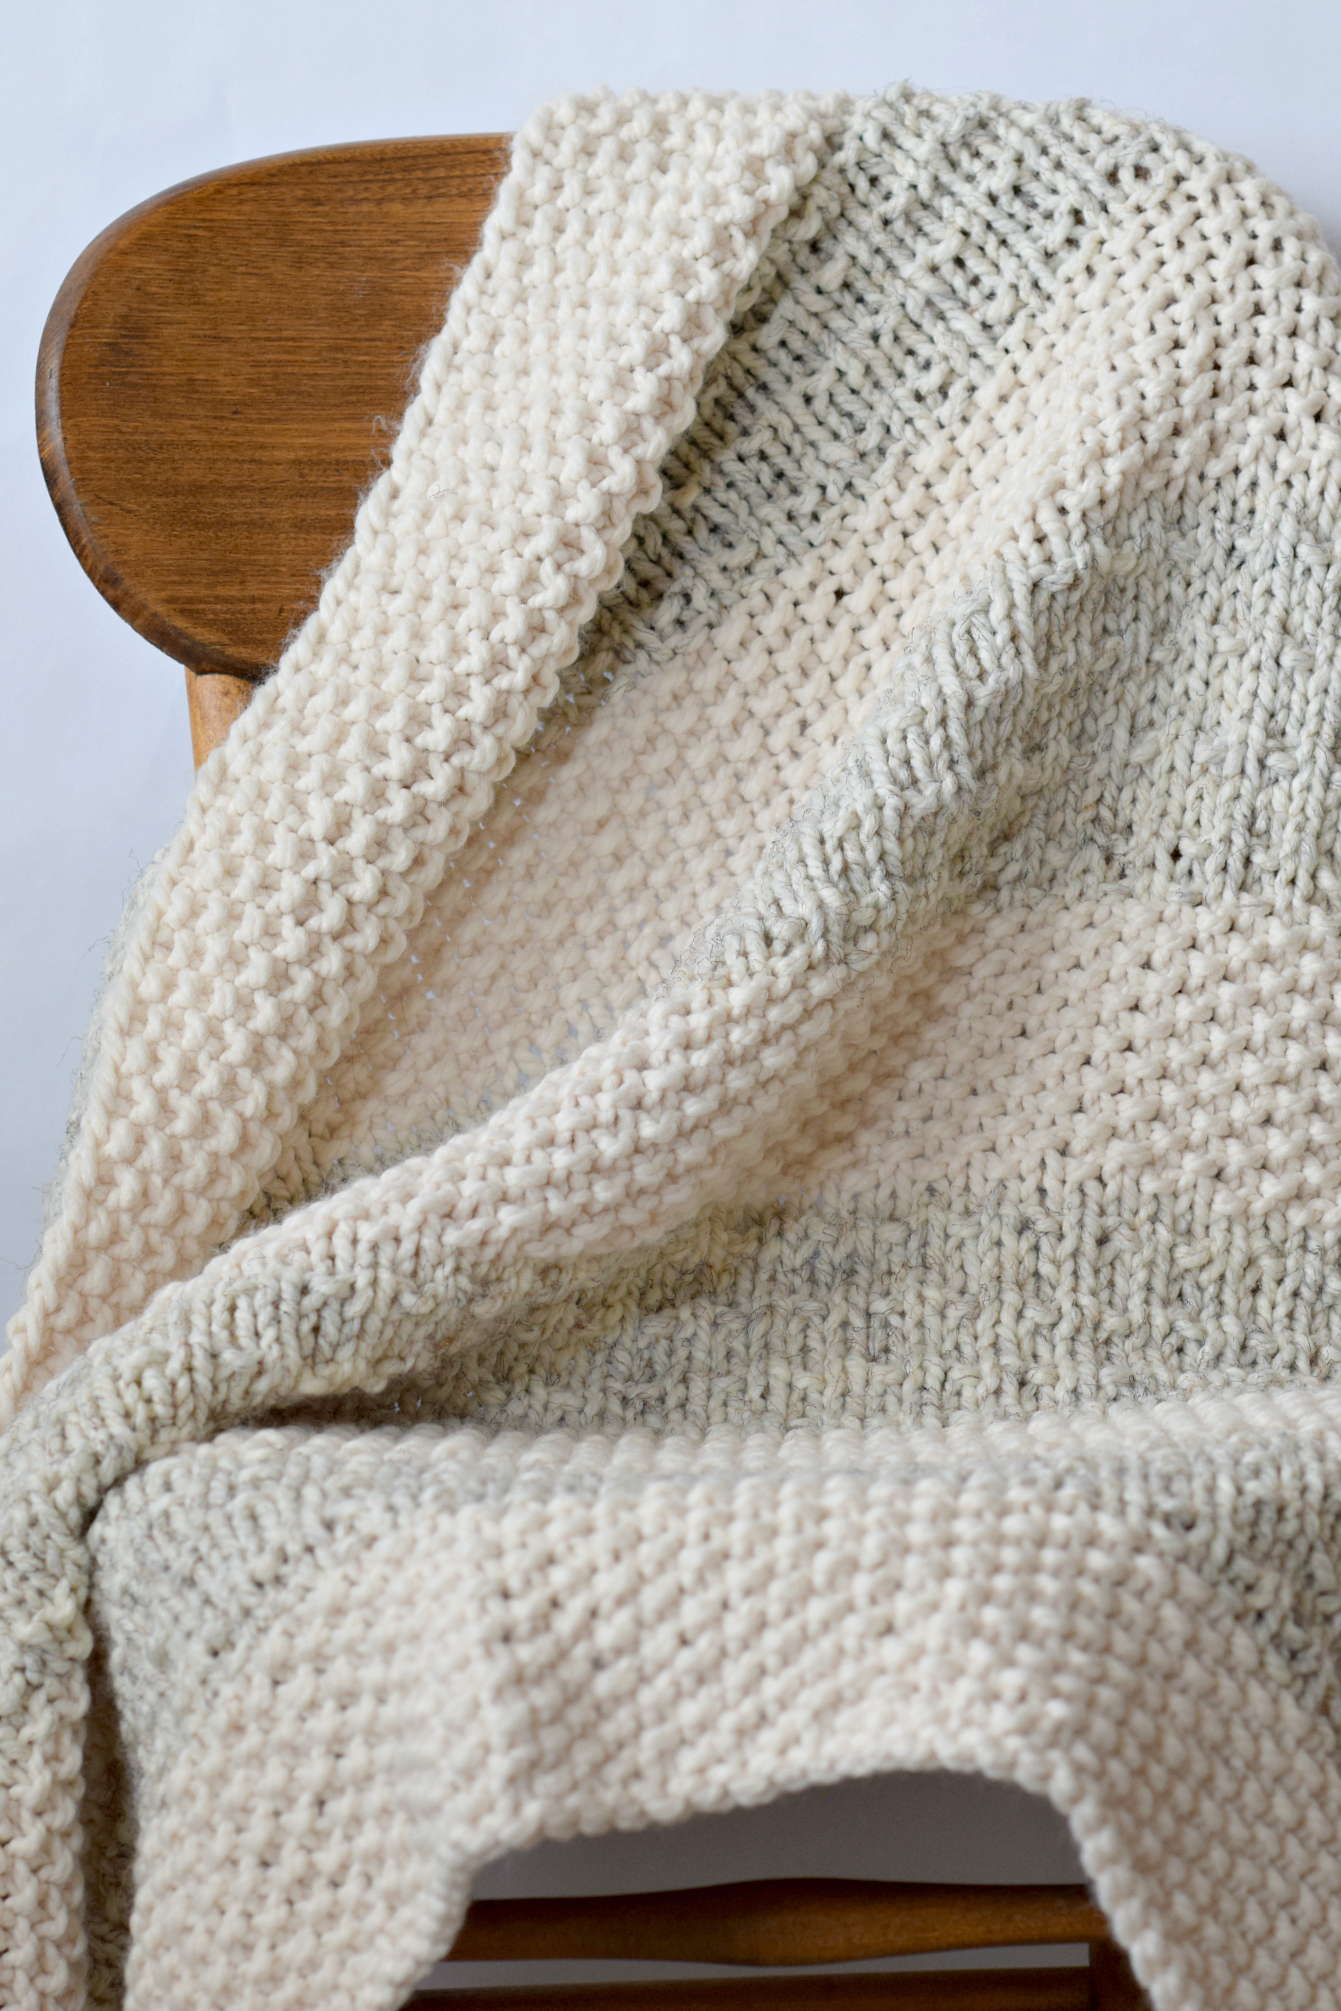 Easy Knitting Patterns To Try - Mama In A Stitch